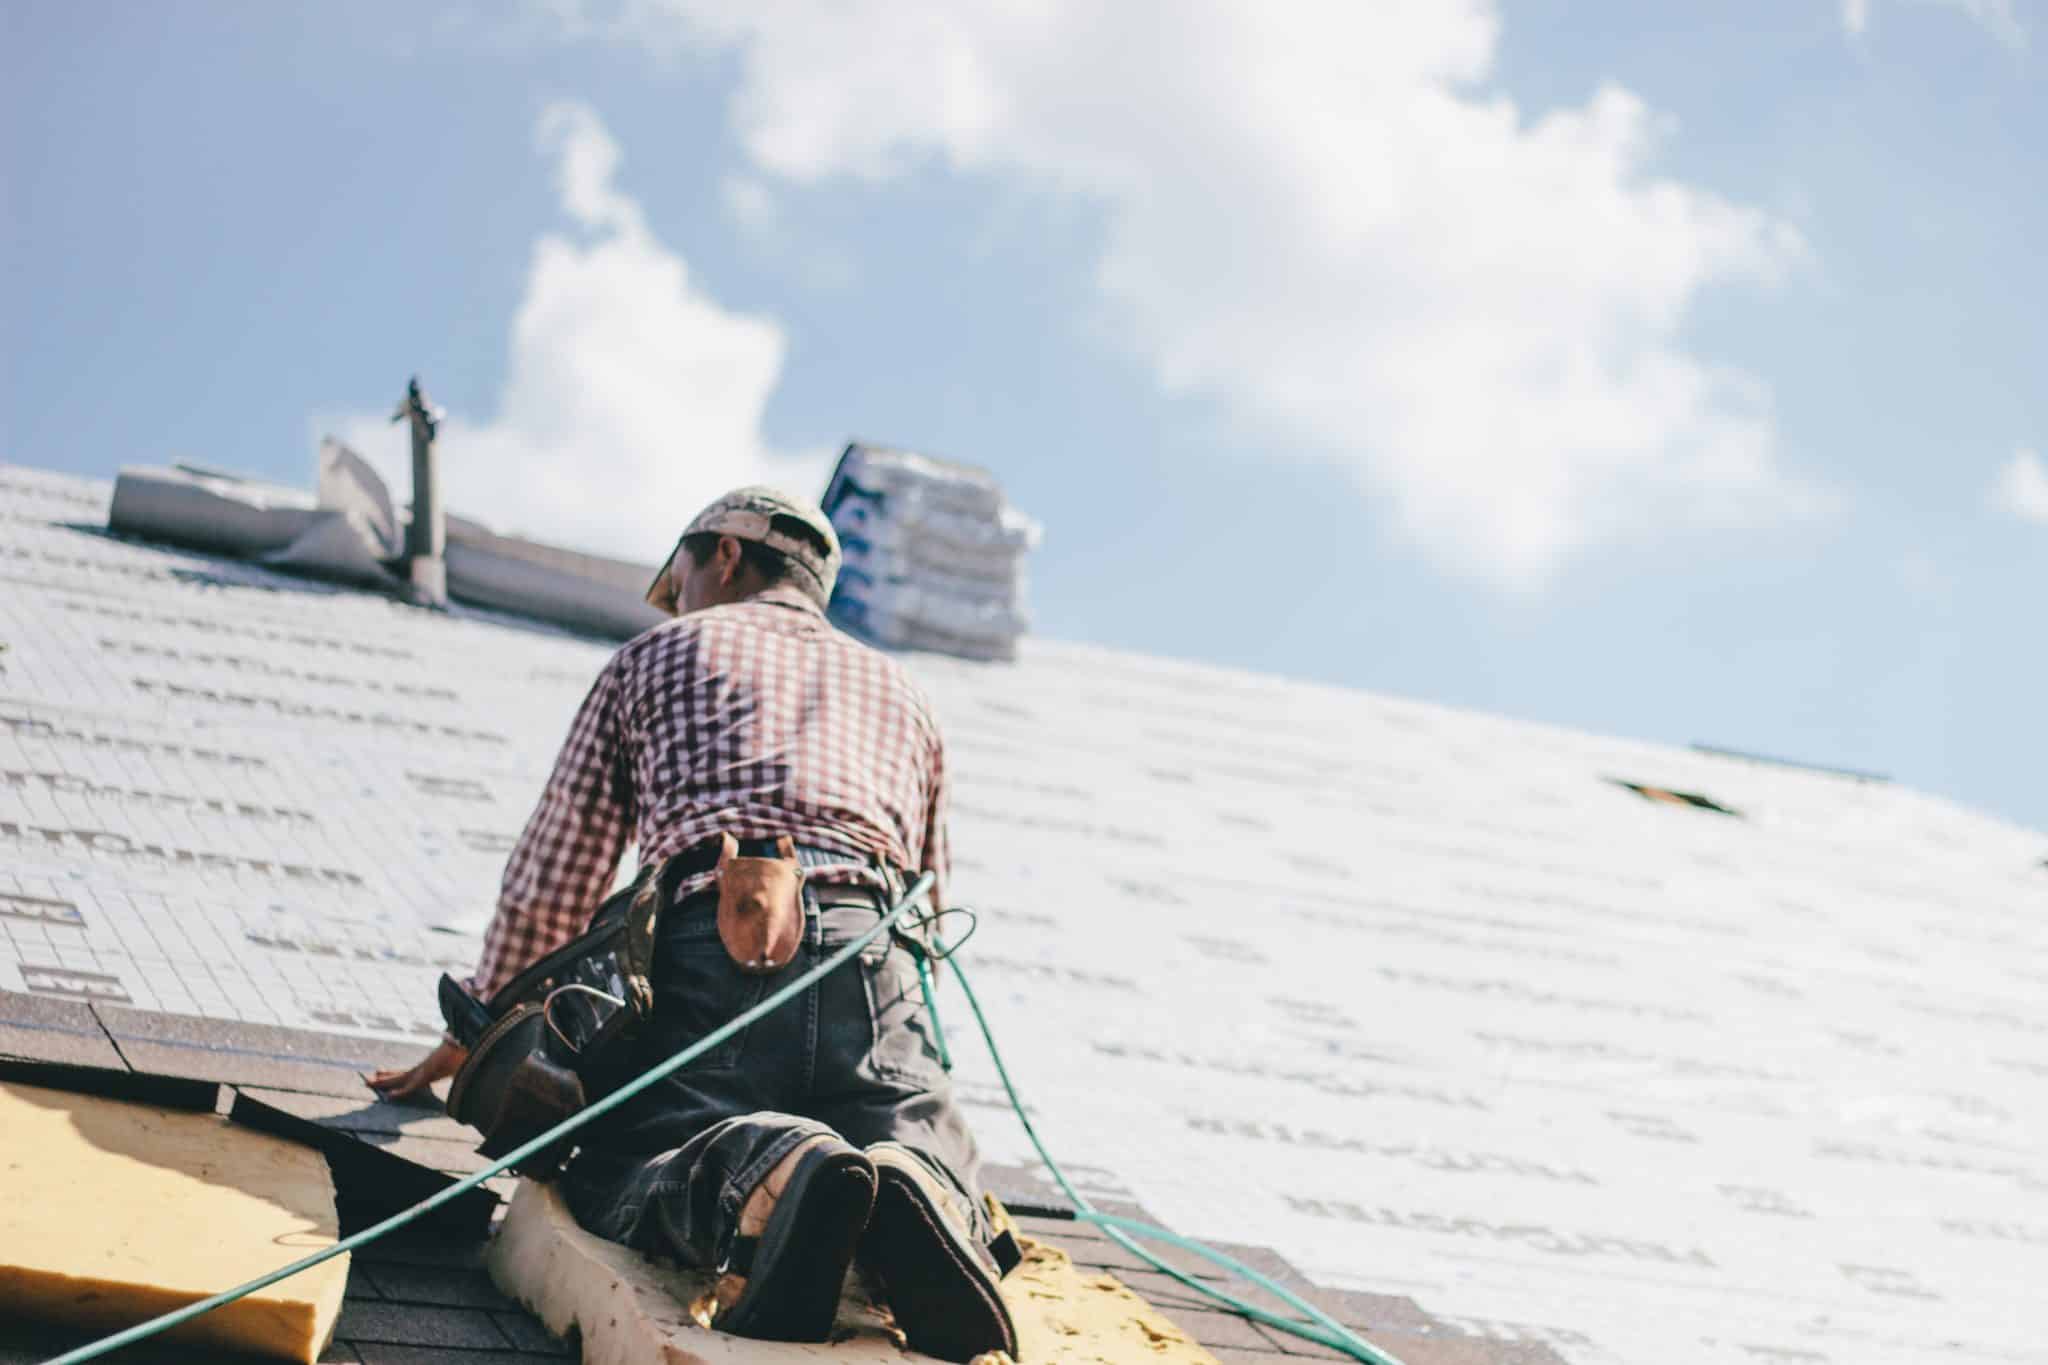 A roofer installing shingles on the roof of a house